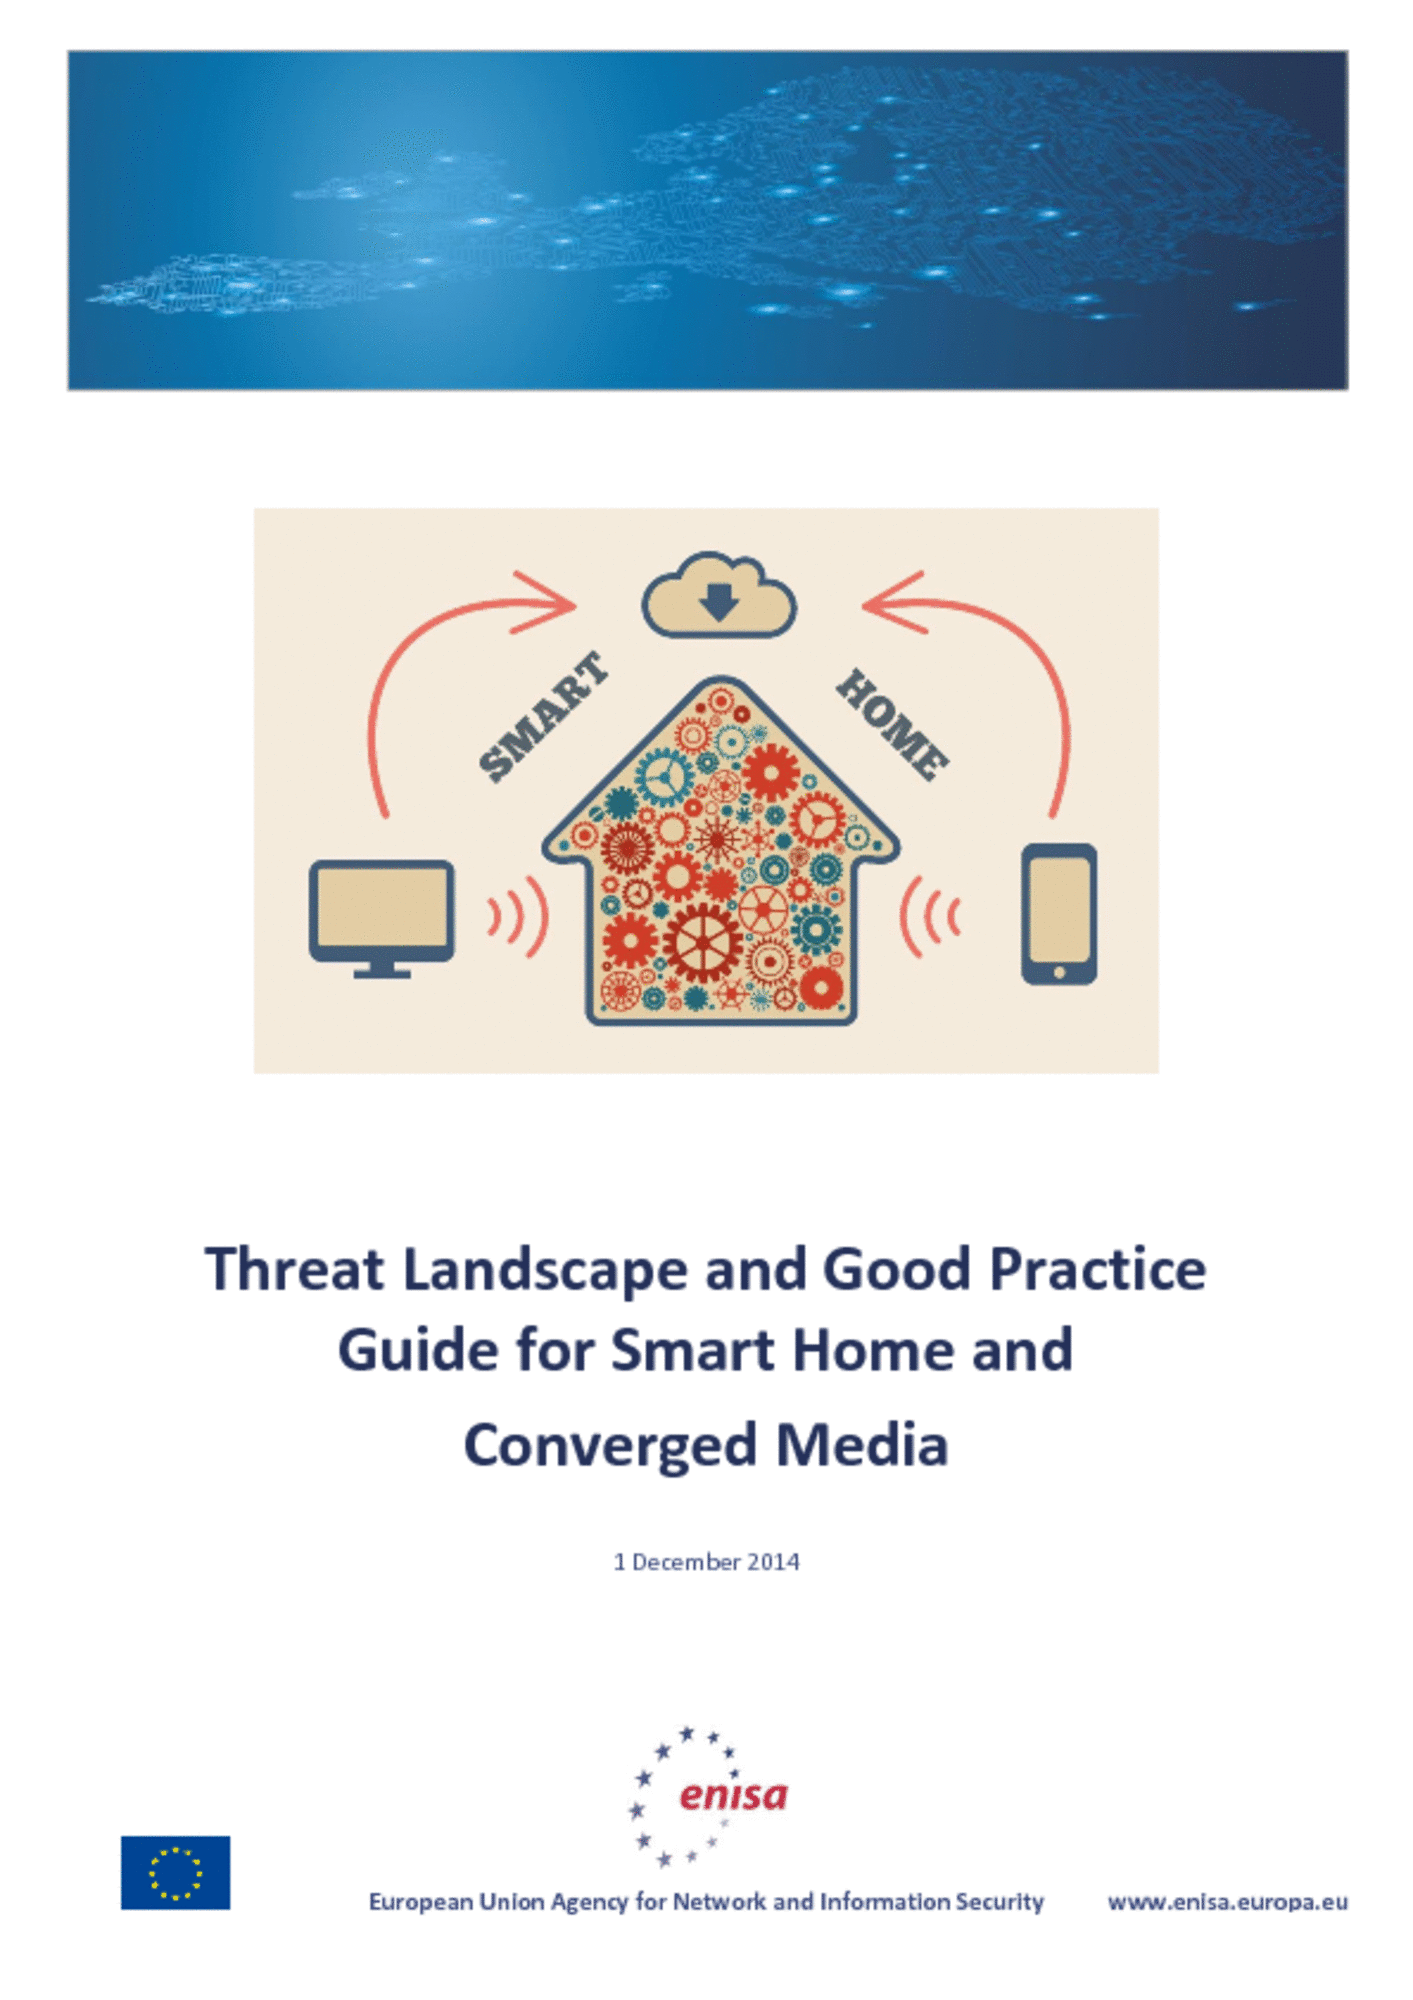 Threat Landscape For Smart Home And Media Convergence — Enisa